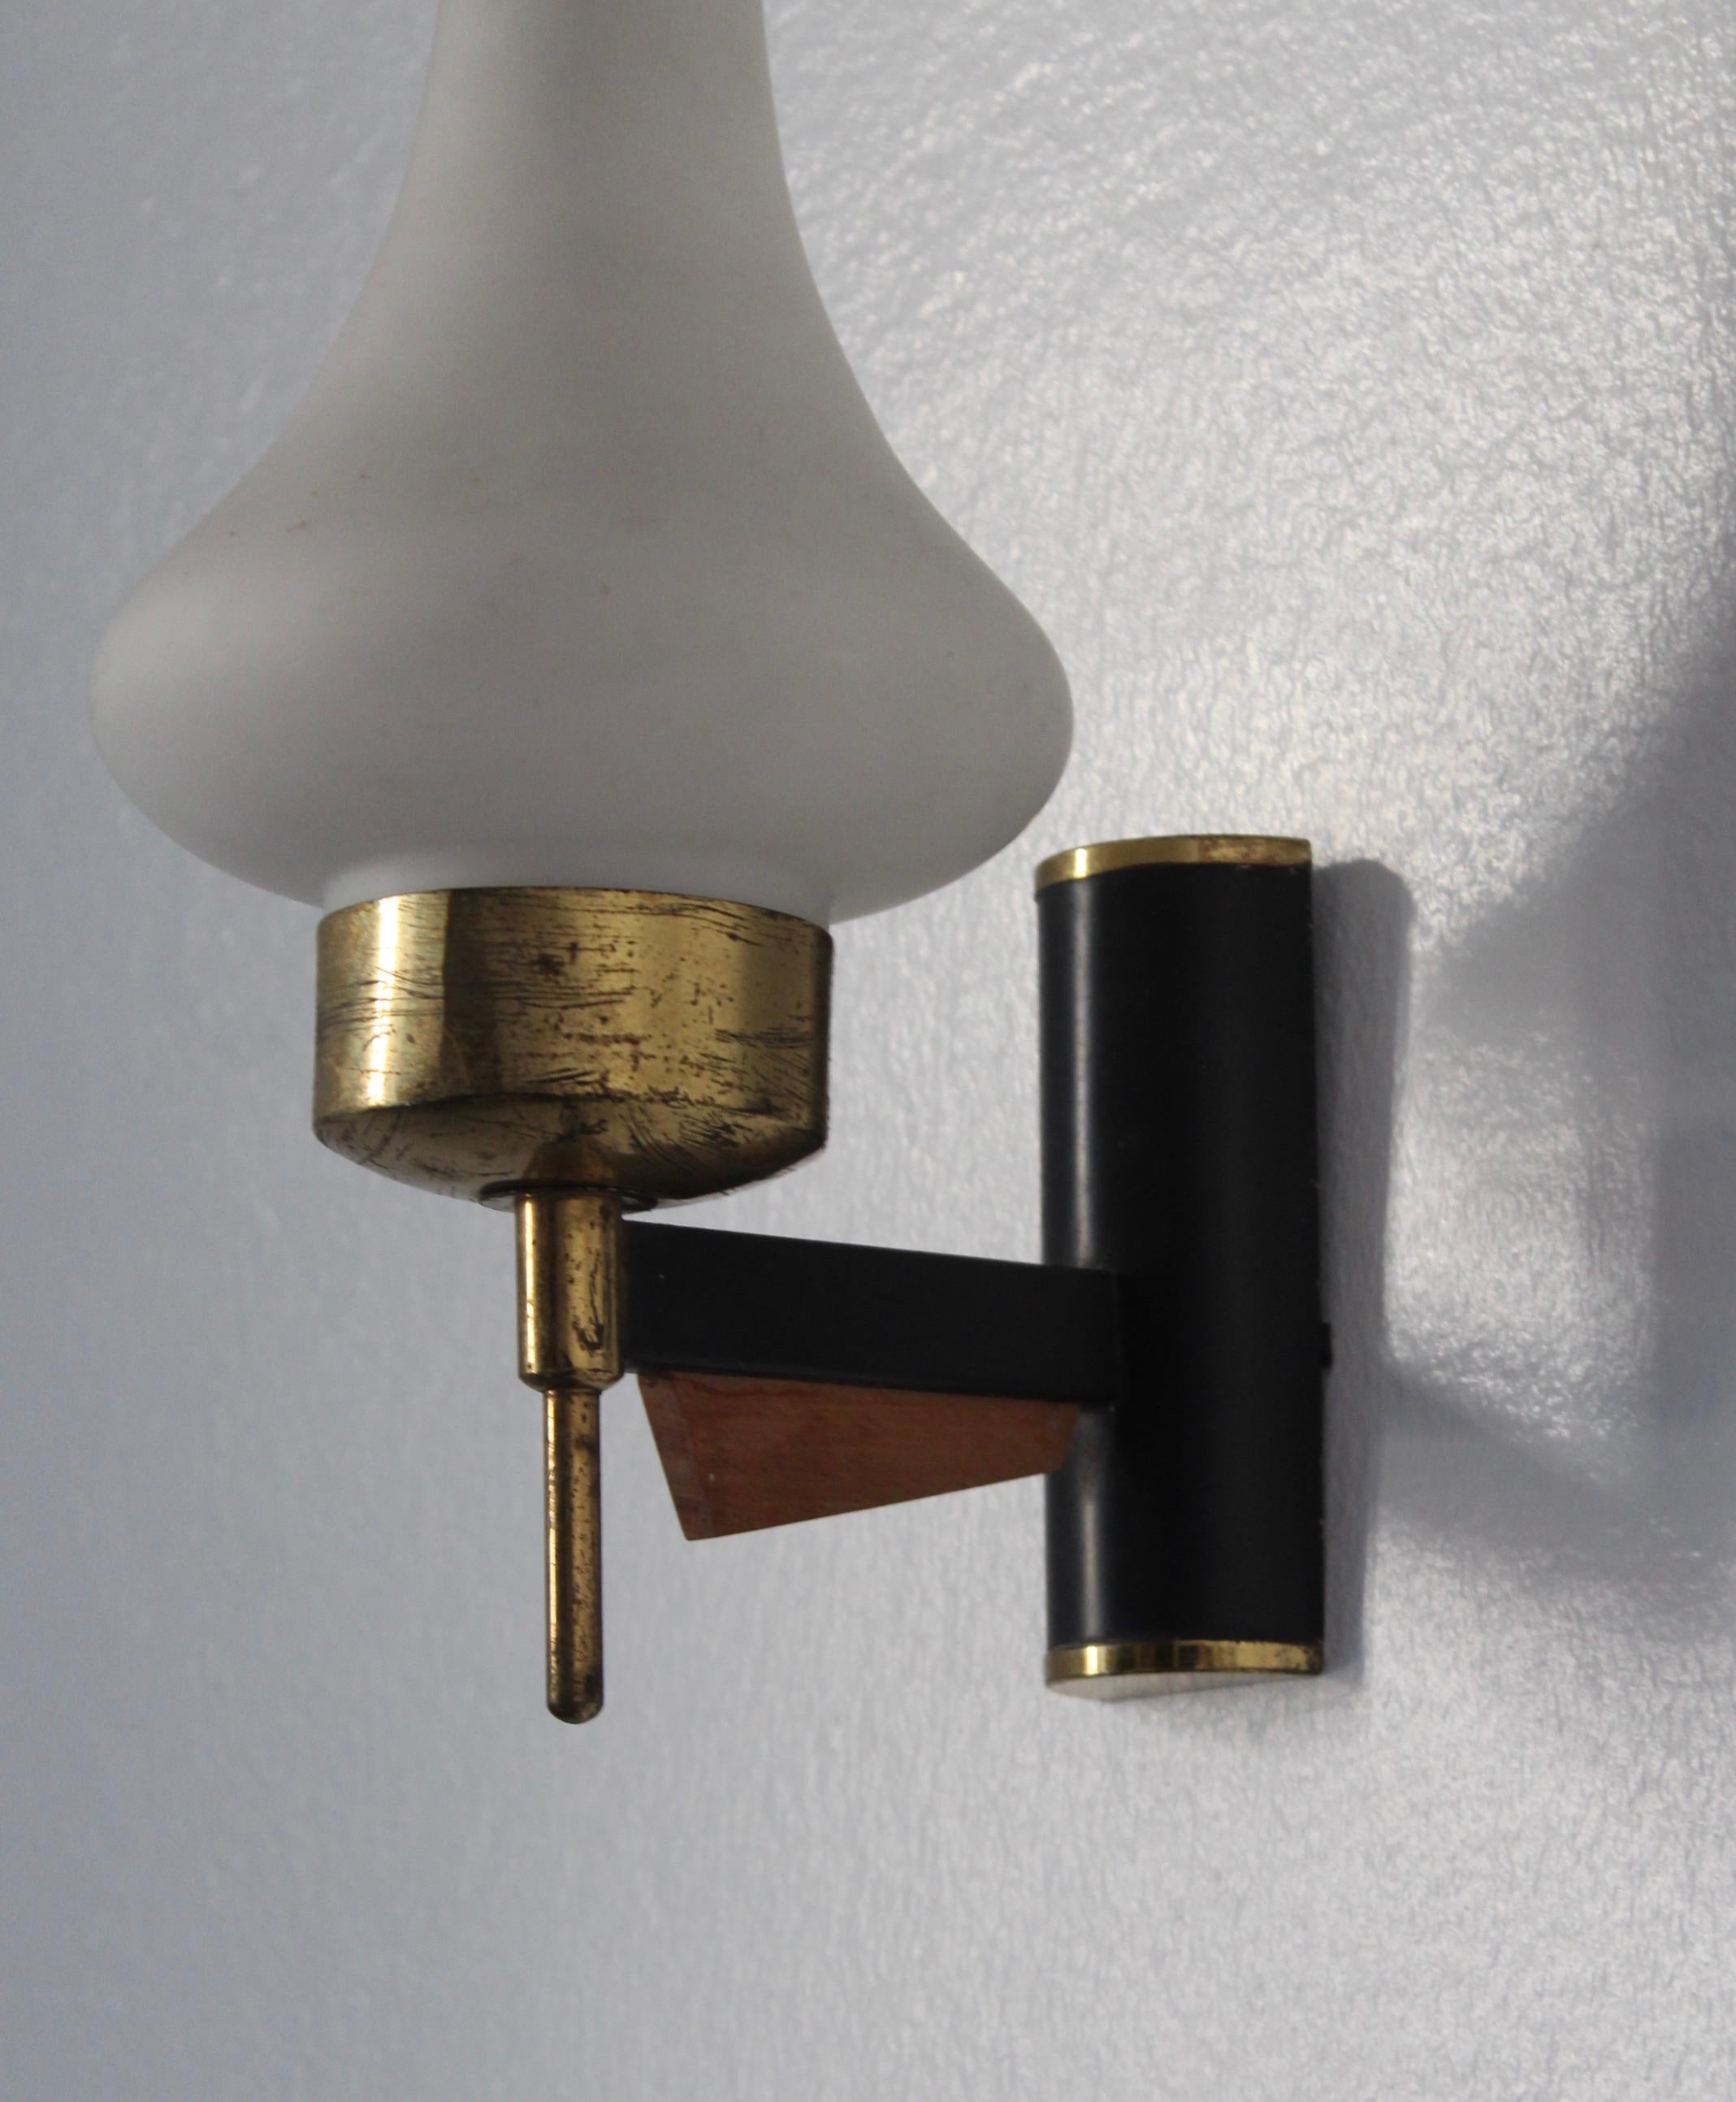 Mid-20th Century Italian, Wall Lights, Brass, Black Lacquer Metal, Teak, Milk Glass, Italy, 1950s For Sale